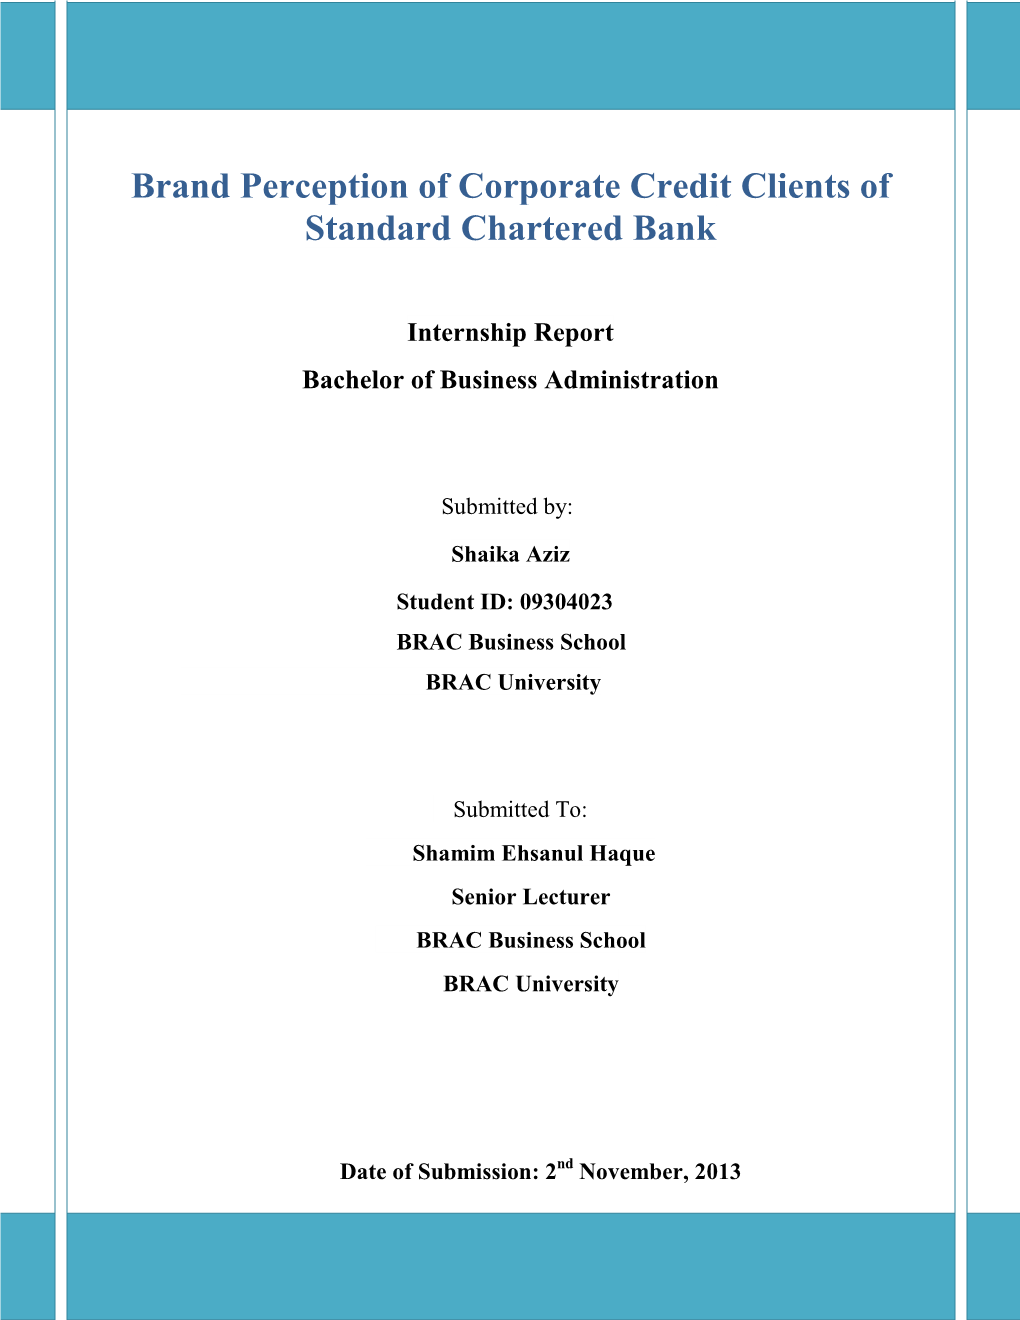 Brand Perception of Corporate Credit Clients of Standard Chartered Bank